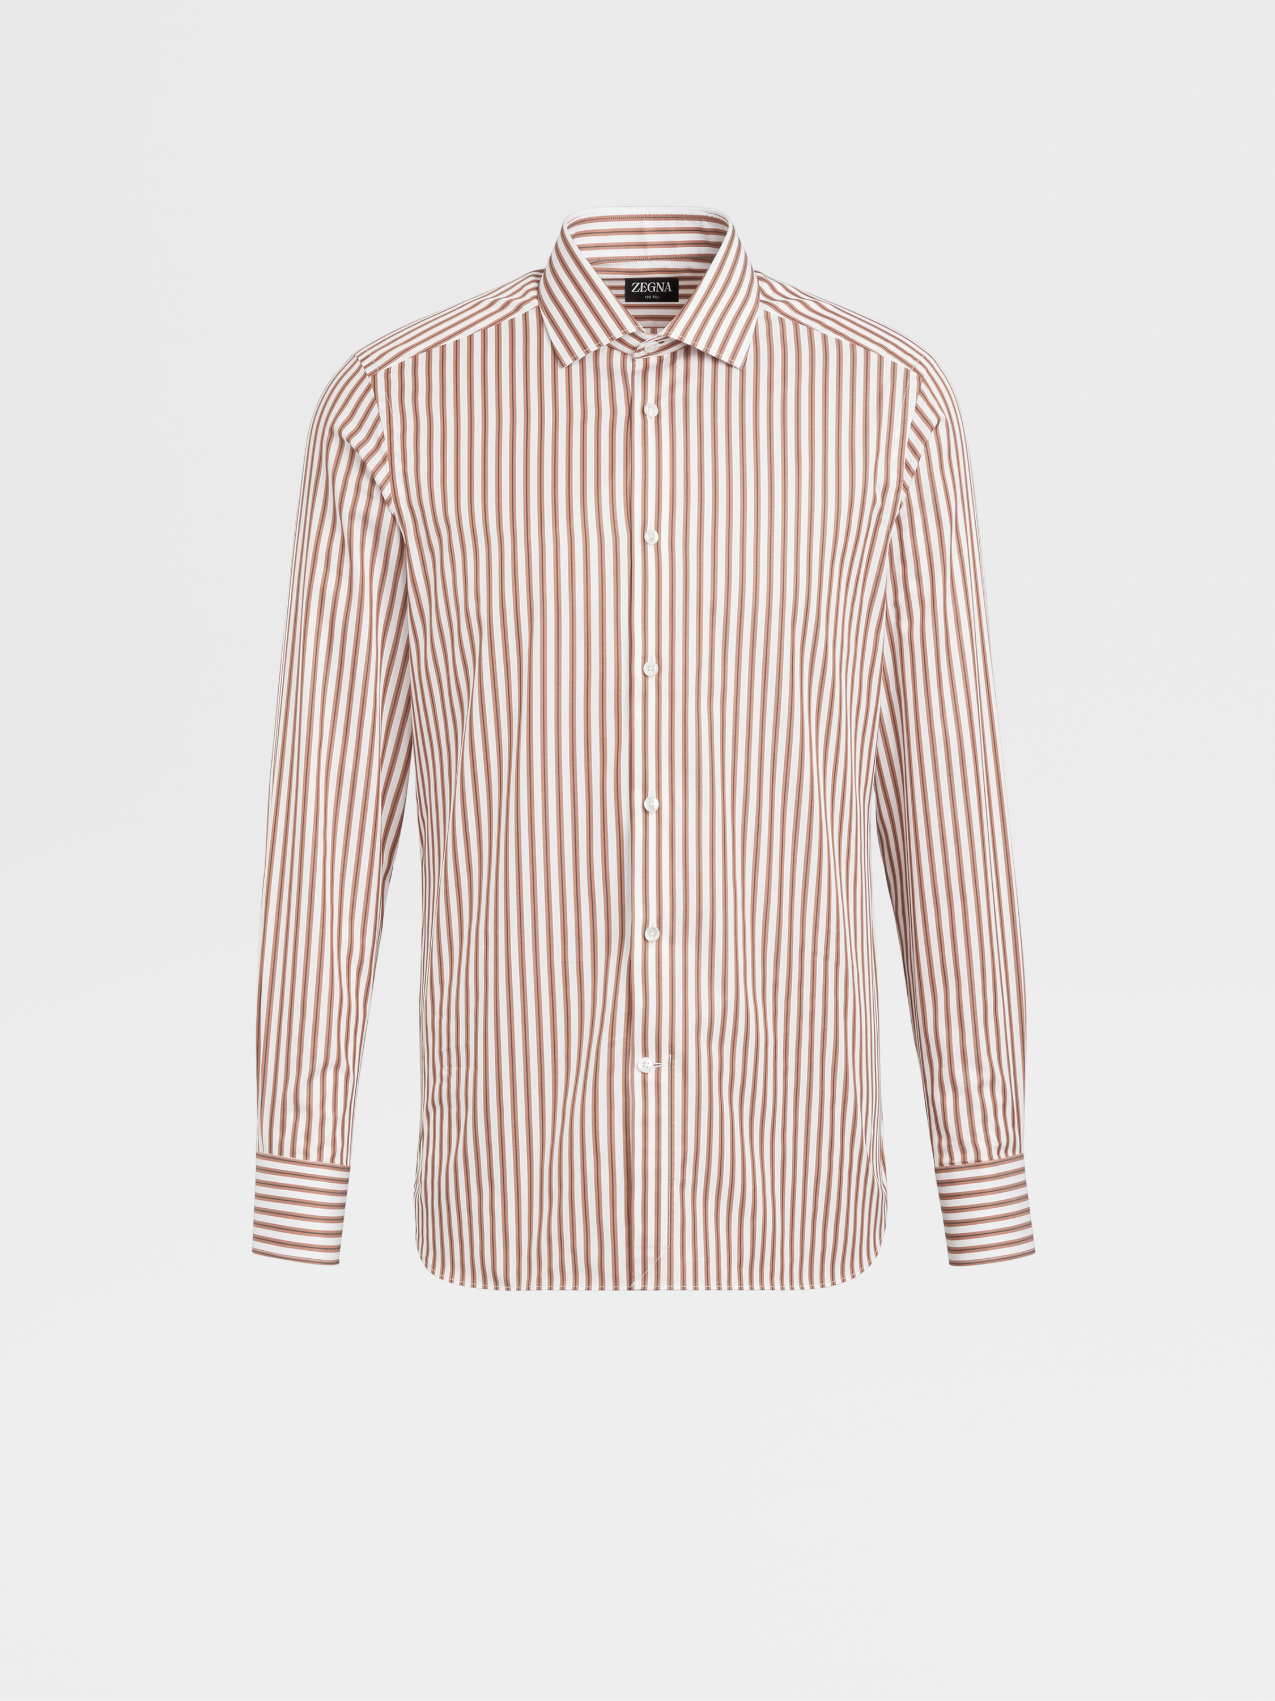 Vicuna Black and White Striped 100fili Cotton Long-sleeve Tailoring Shirt